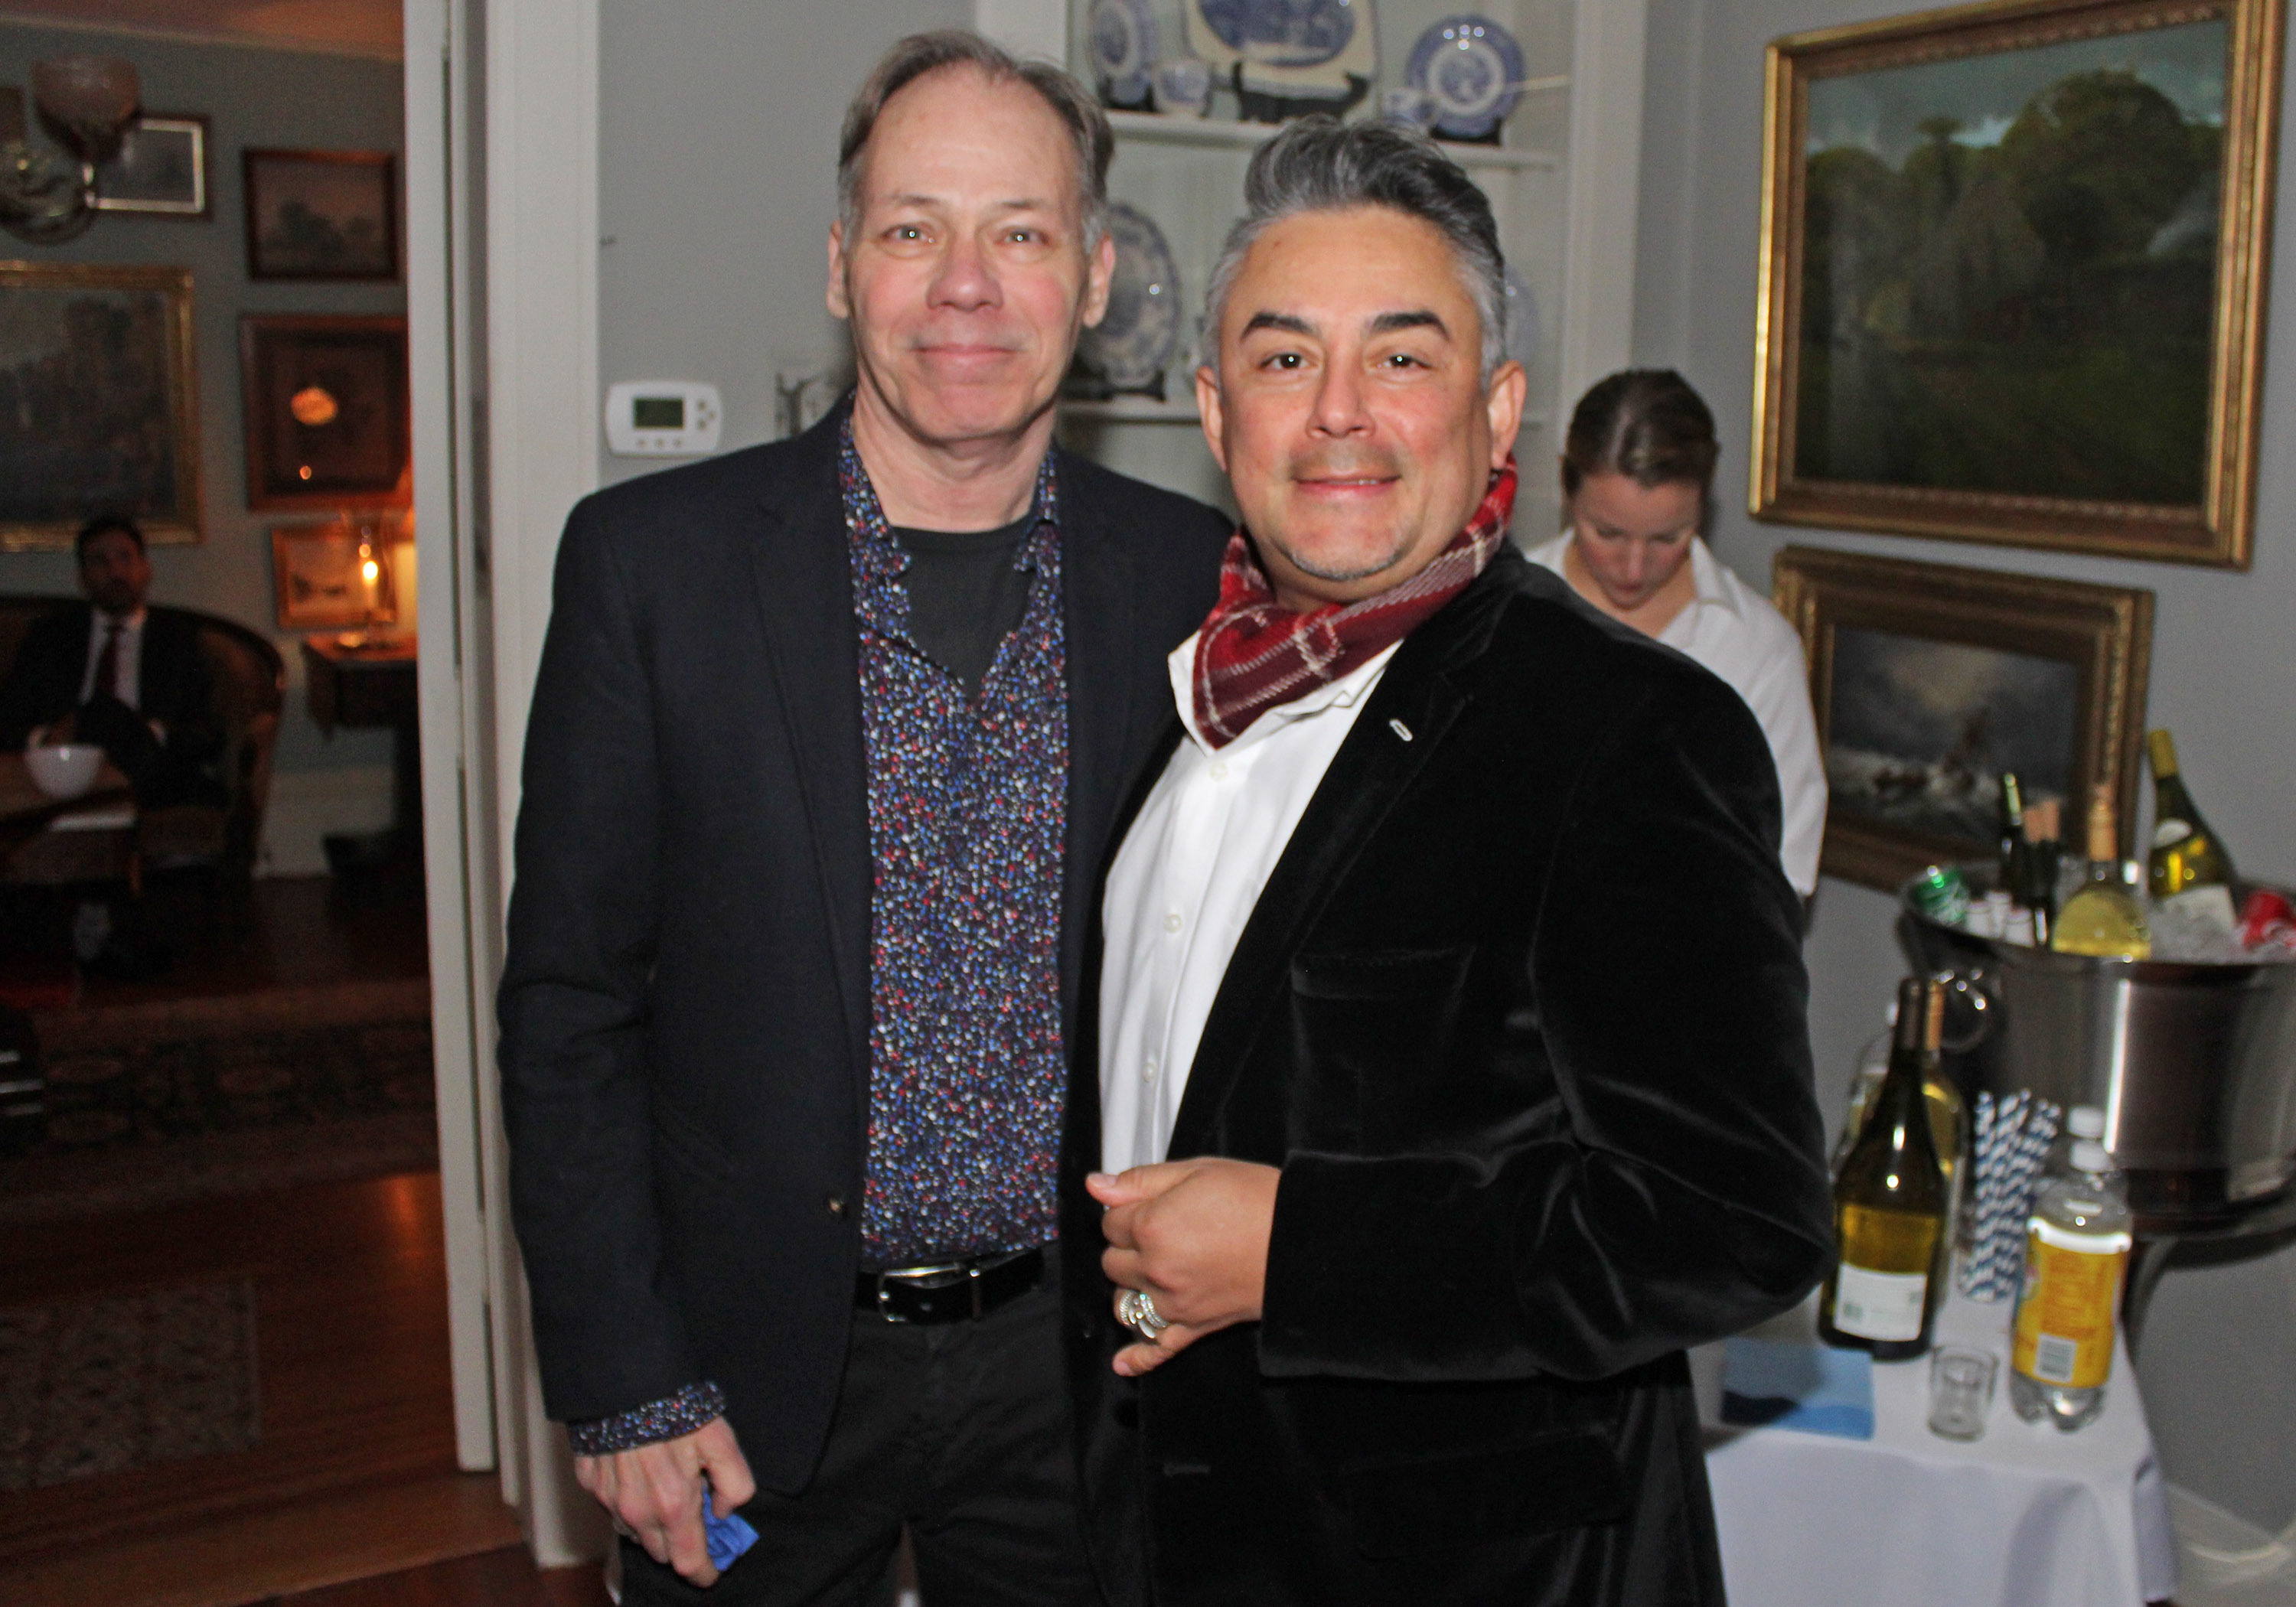 The Southampton History Museum hosted a benefit for the Southampton Animal Shelter Foundation on Saturday evening. TOM KOCHIE